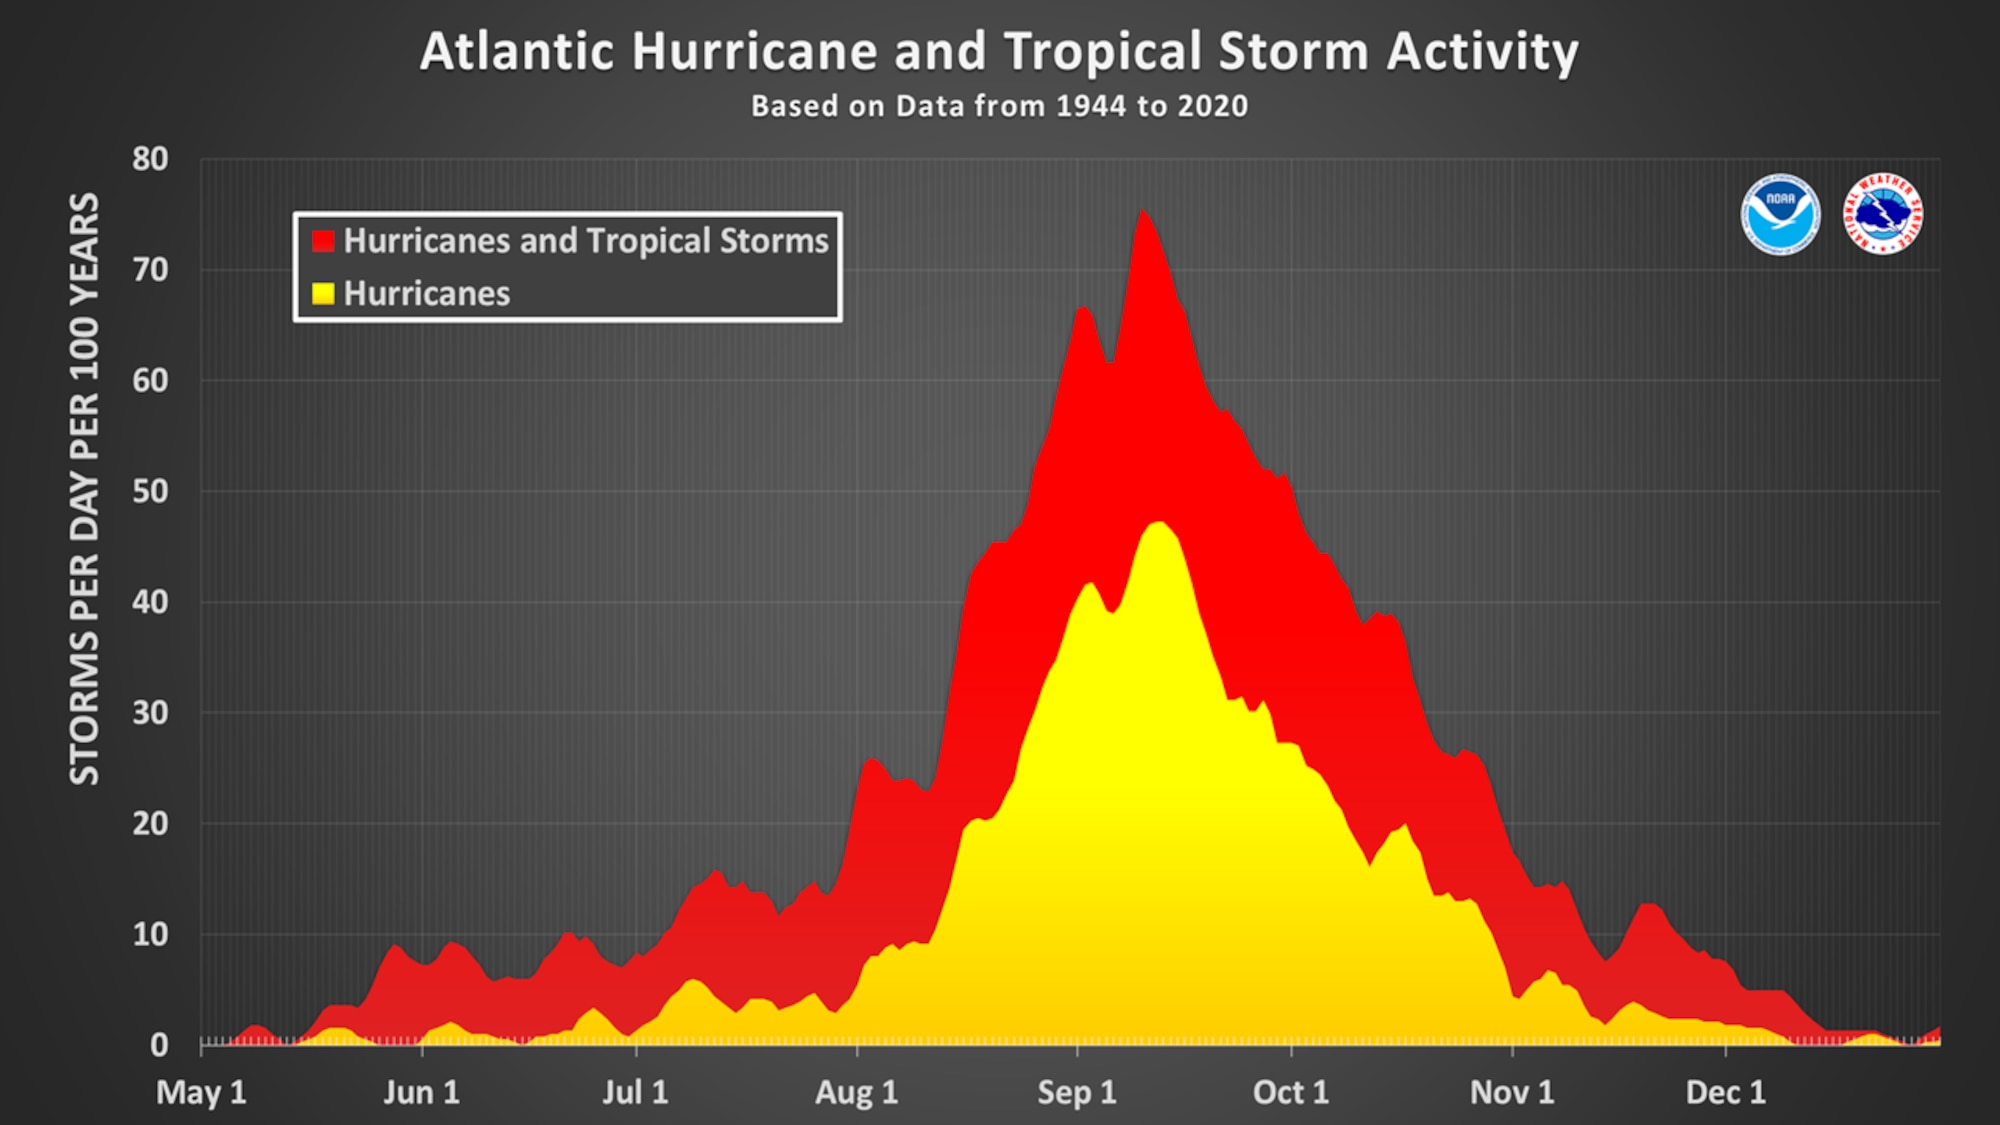 Atlantic Hurricane and Tropical Storm Activity graphic ranging 1944 to 2020.